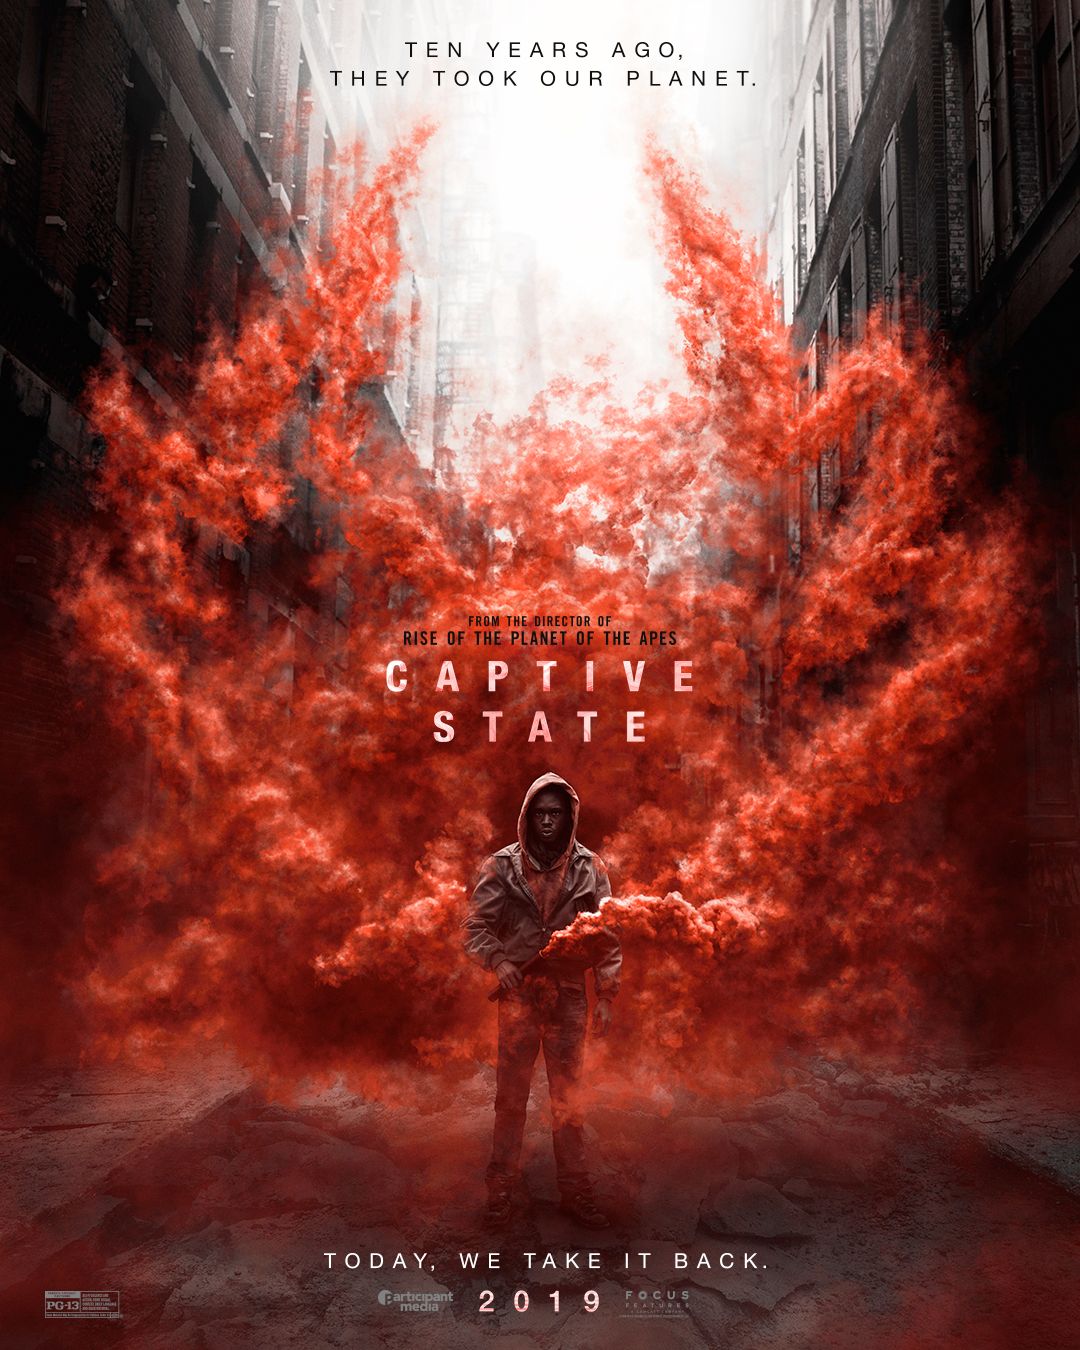 Captive State poster art